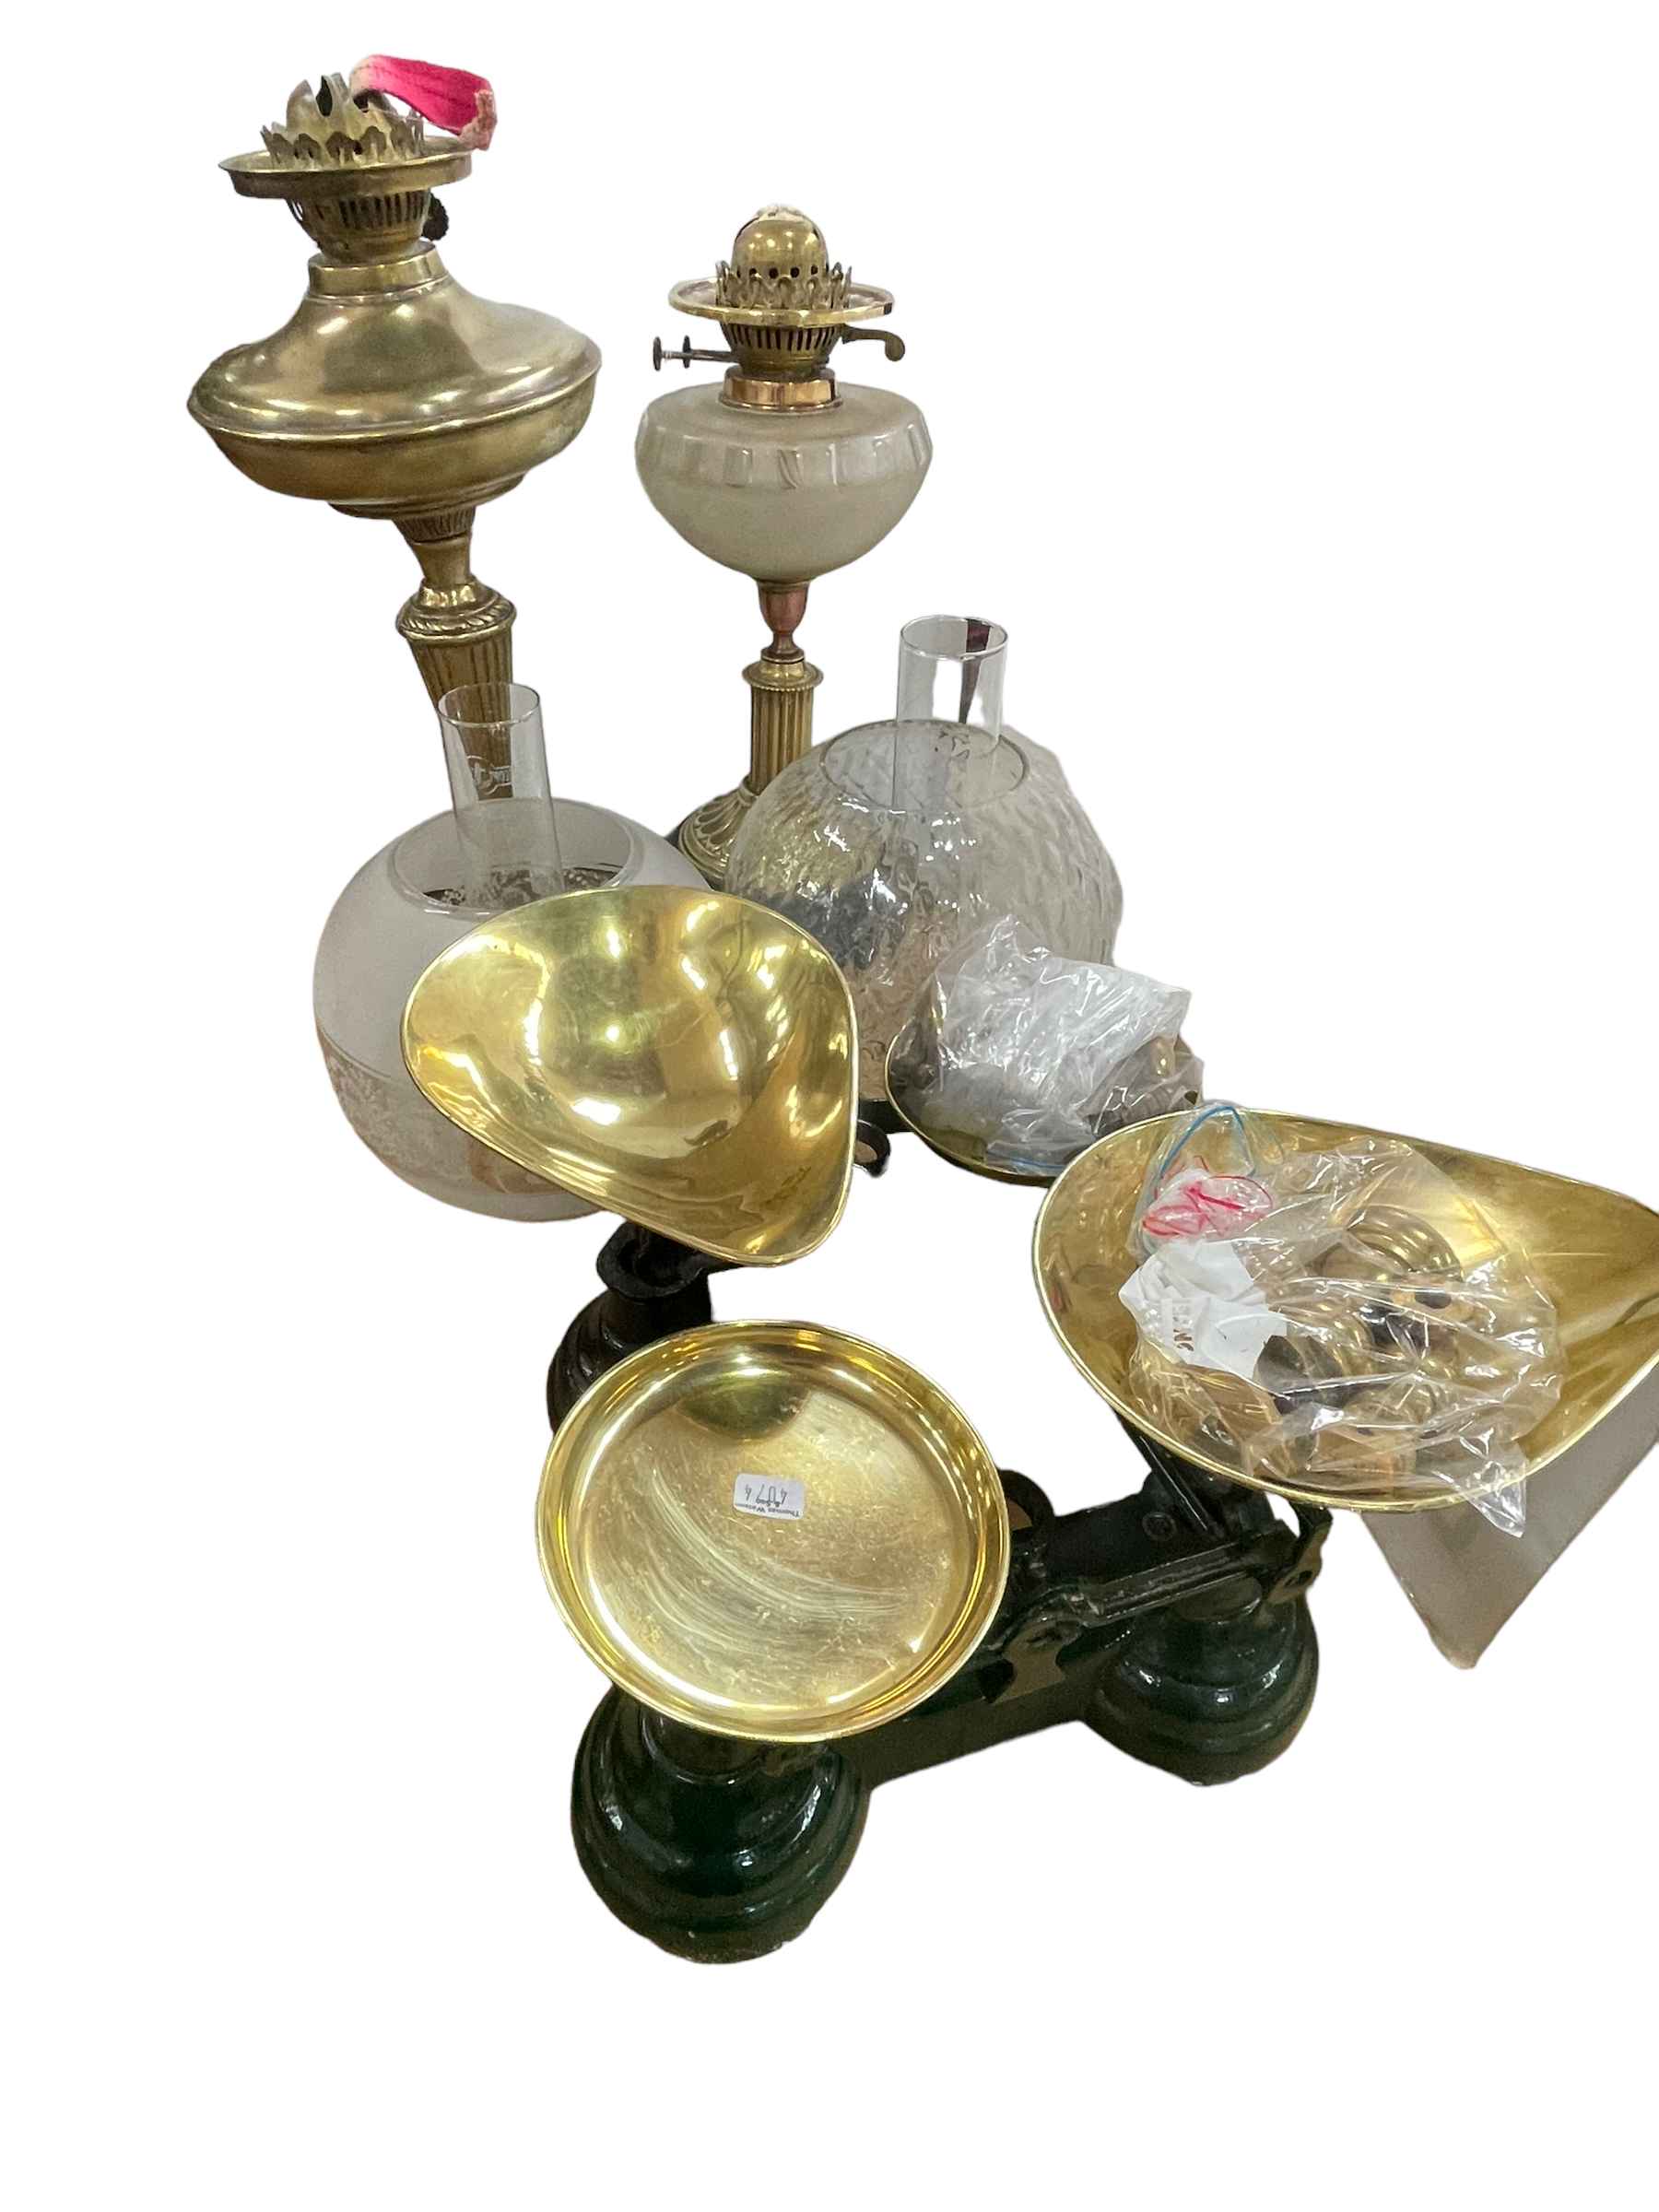 Two brass oil lamps with frosted and clear glass shades and two sets of kitchen scales and weights.